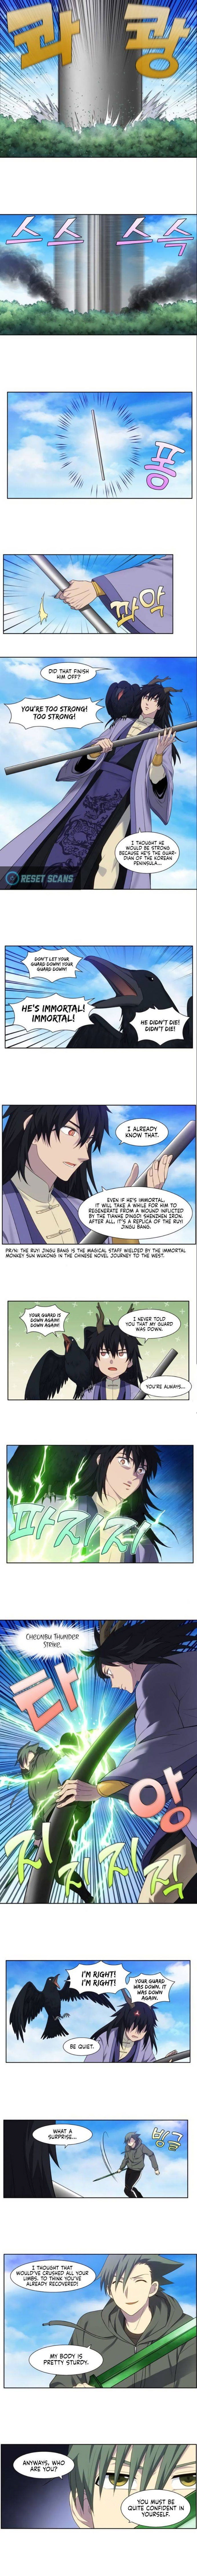 the-gamer-chap-373-1